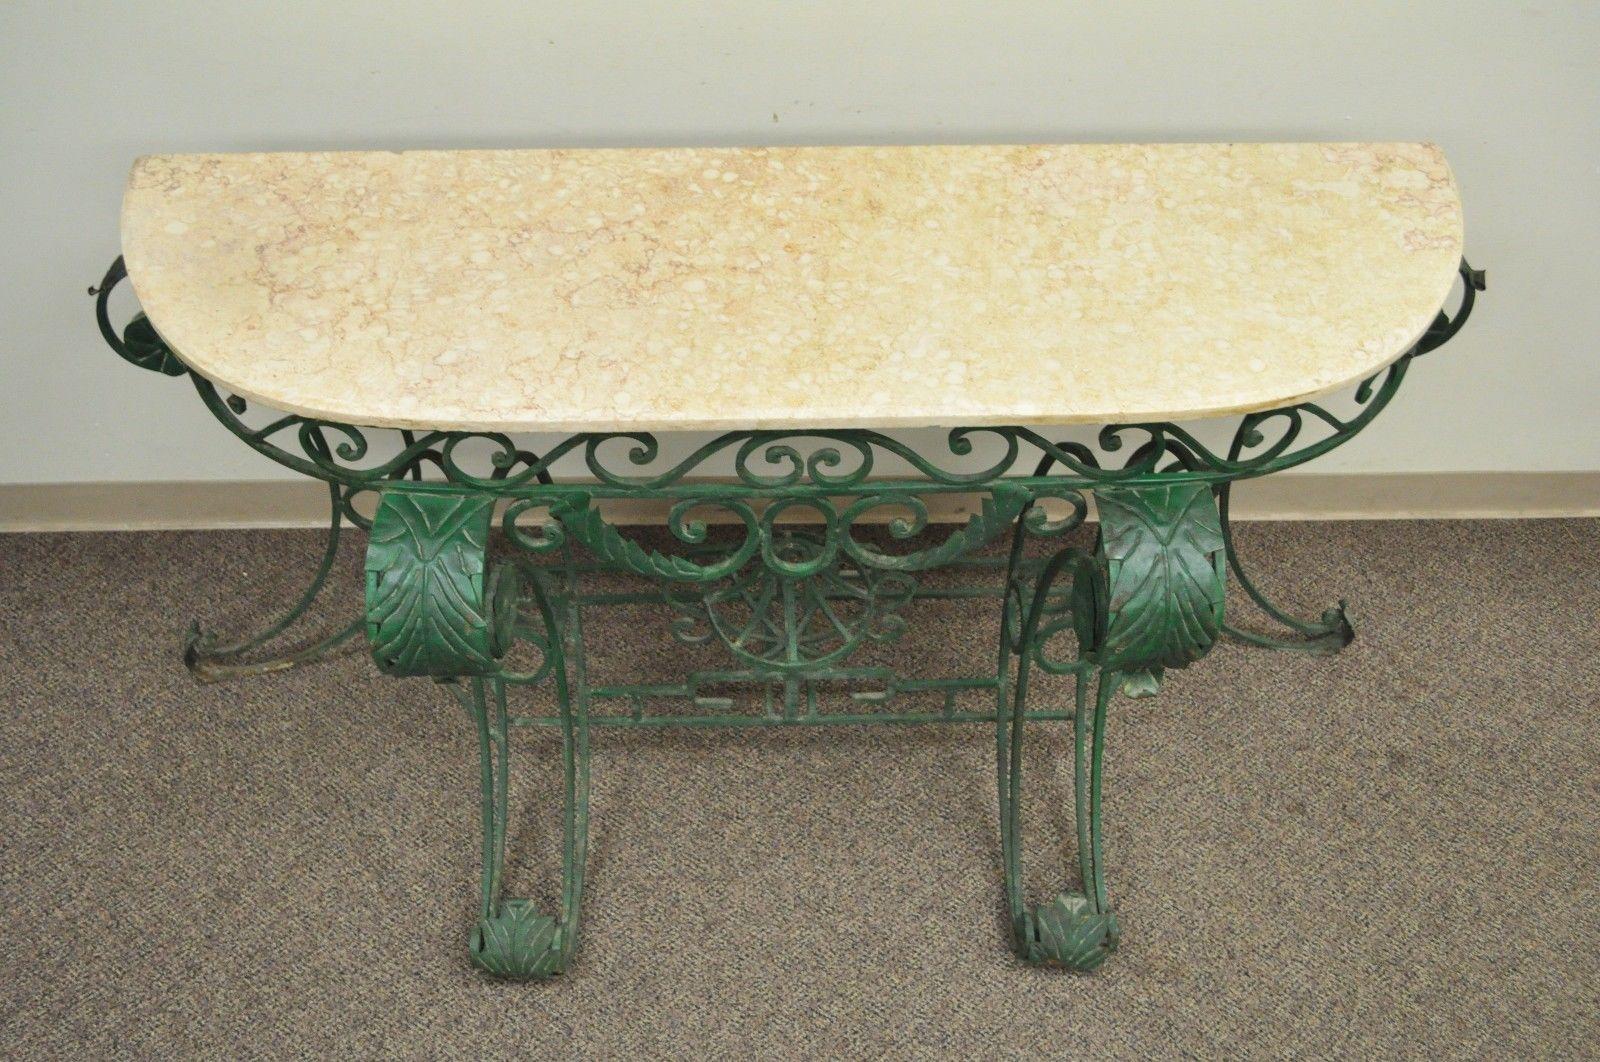 20th Century Ornate Italian Regency Style Green Wrought Iron Marble-Top Console Table